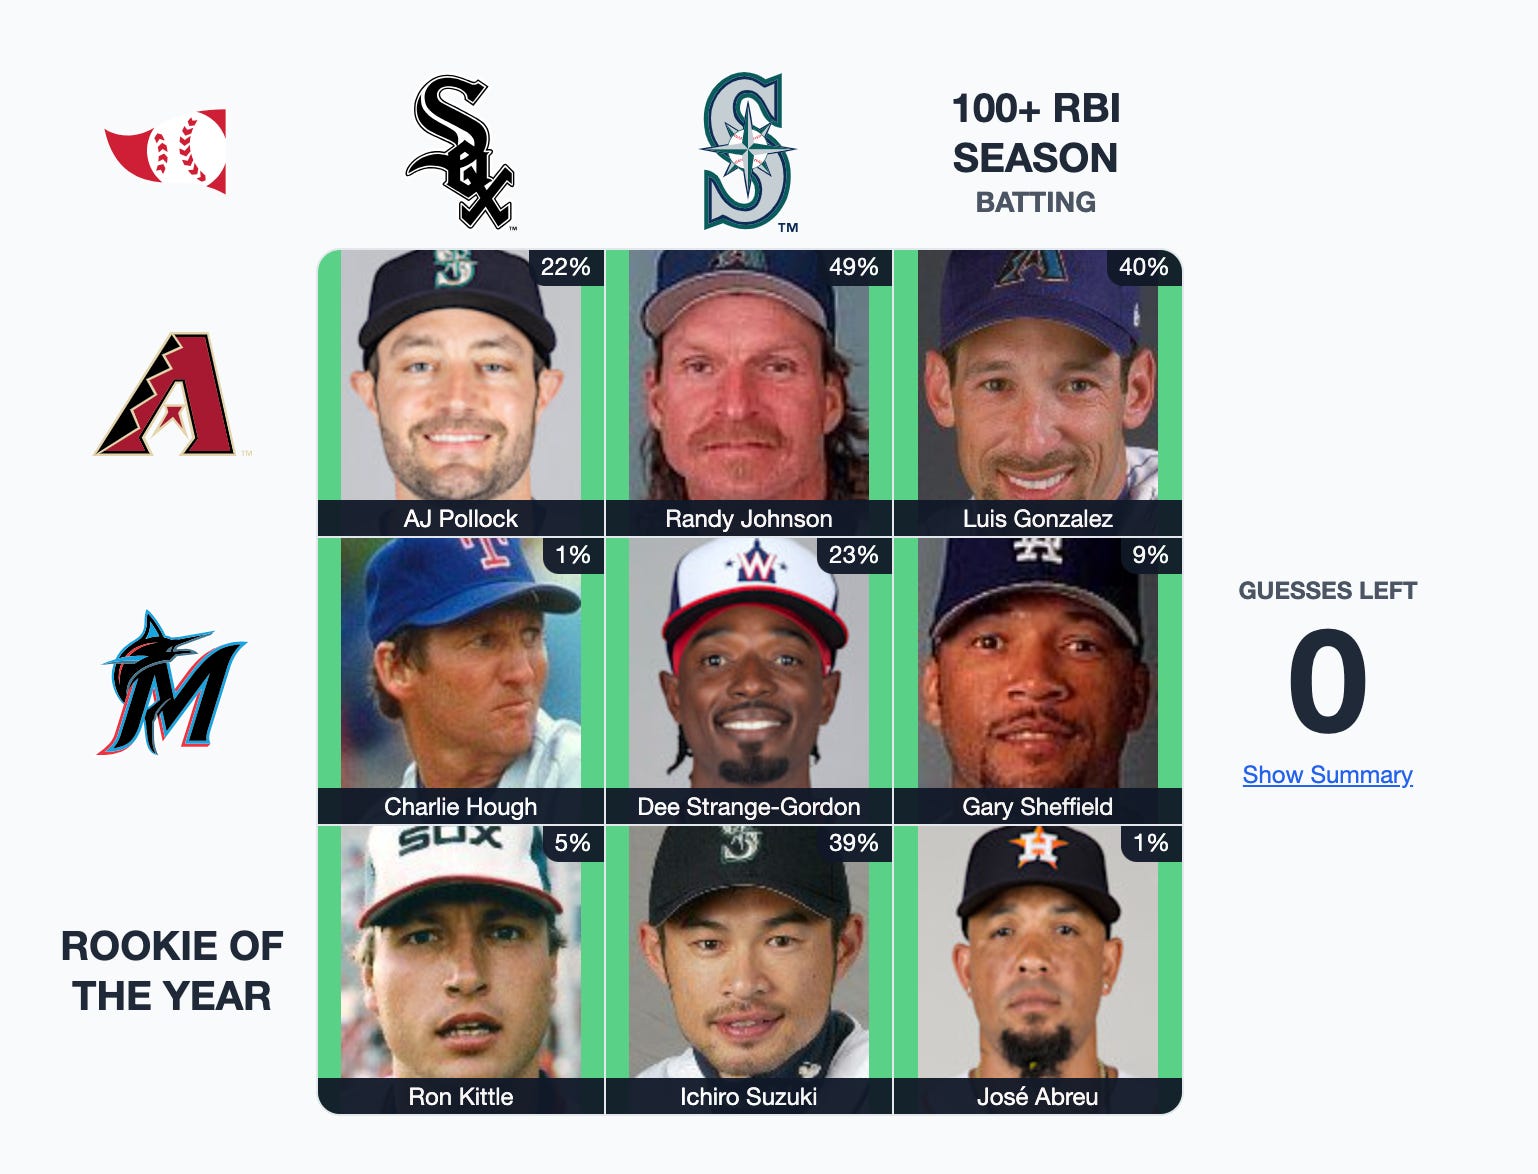 Which players have played for both Rockies and Athletics in their careers?  MLB Immaculate Grid answers for July 13